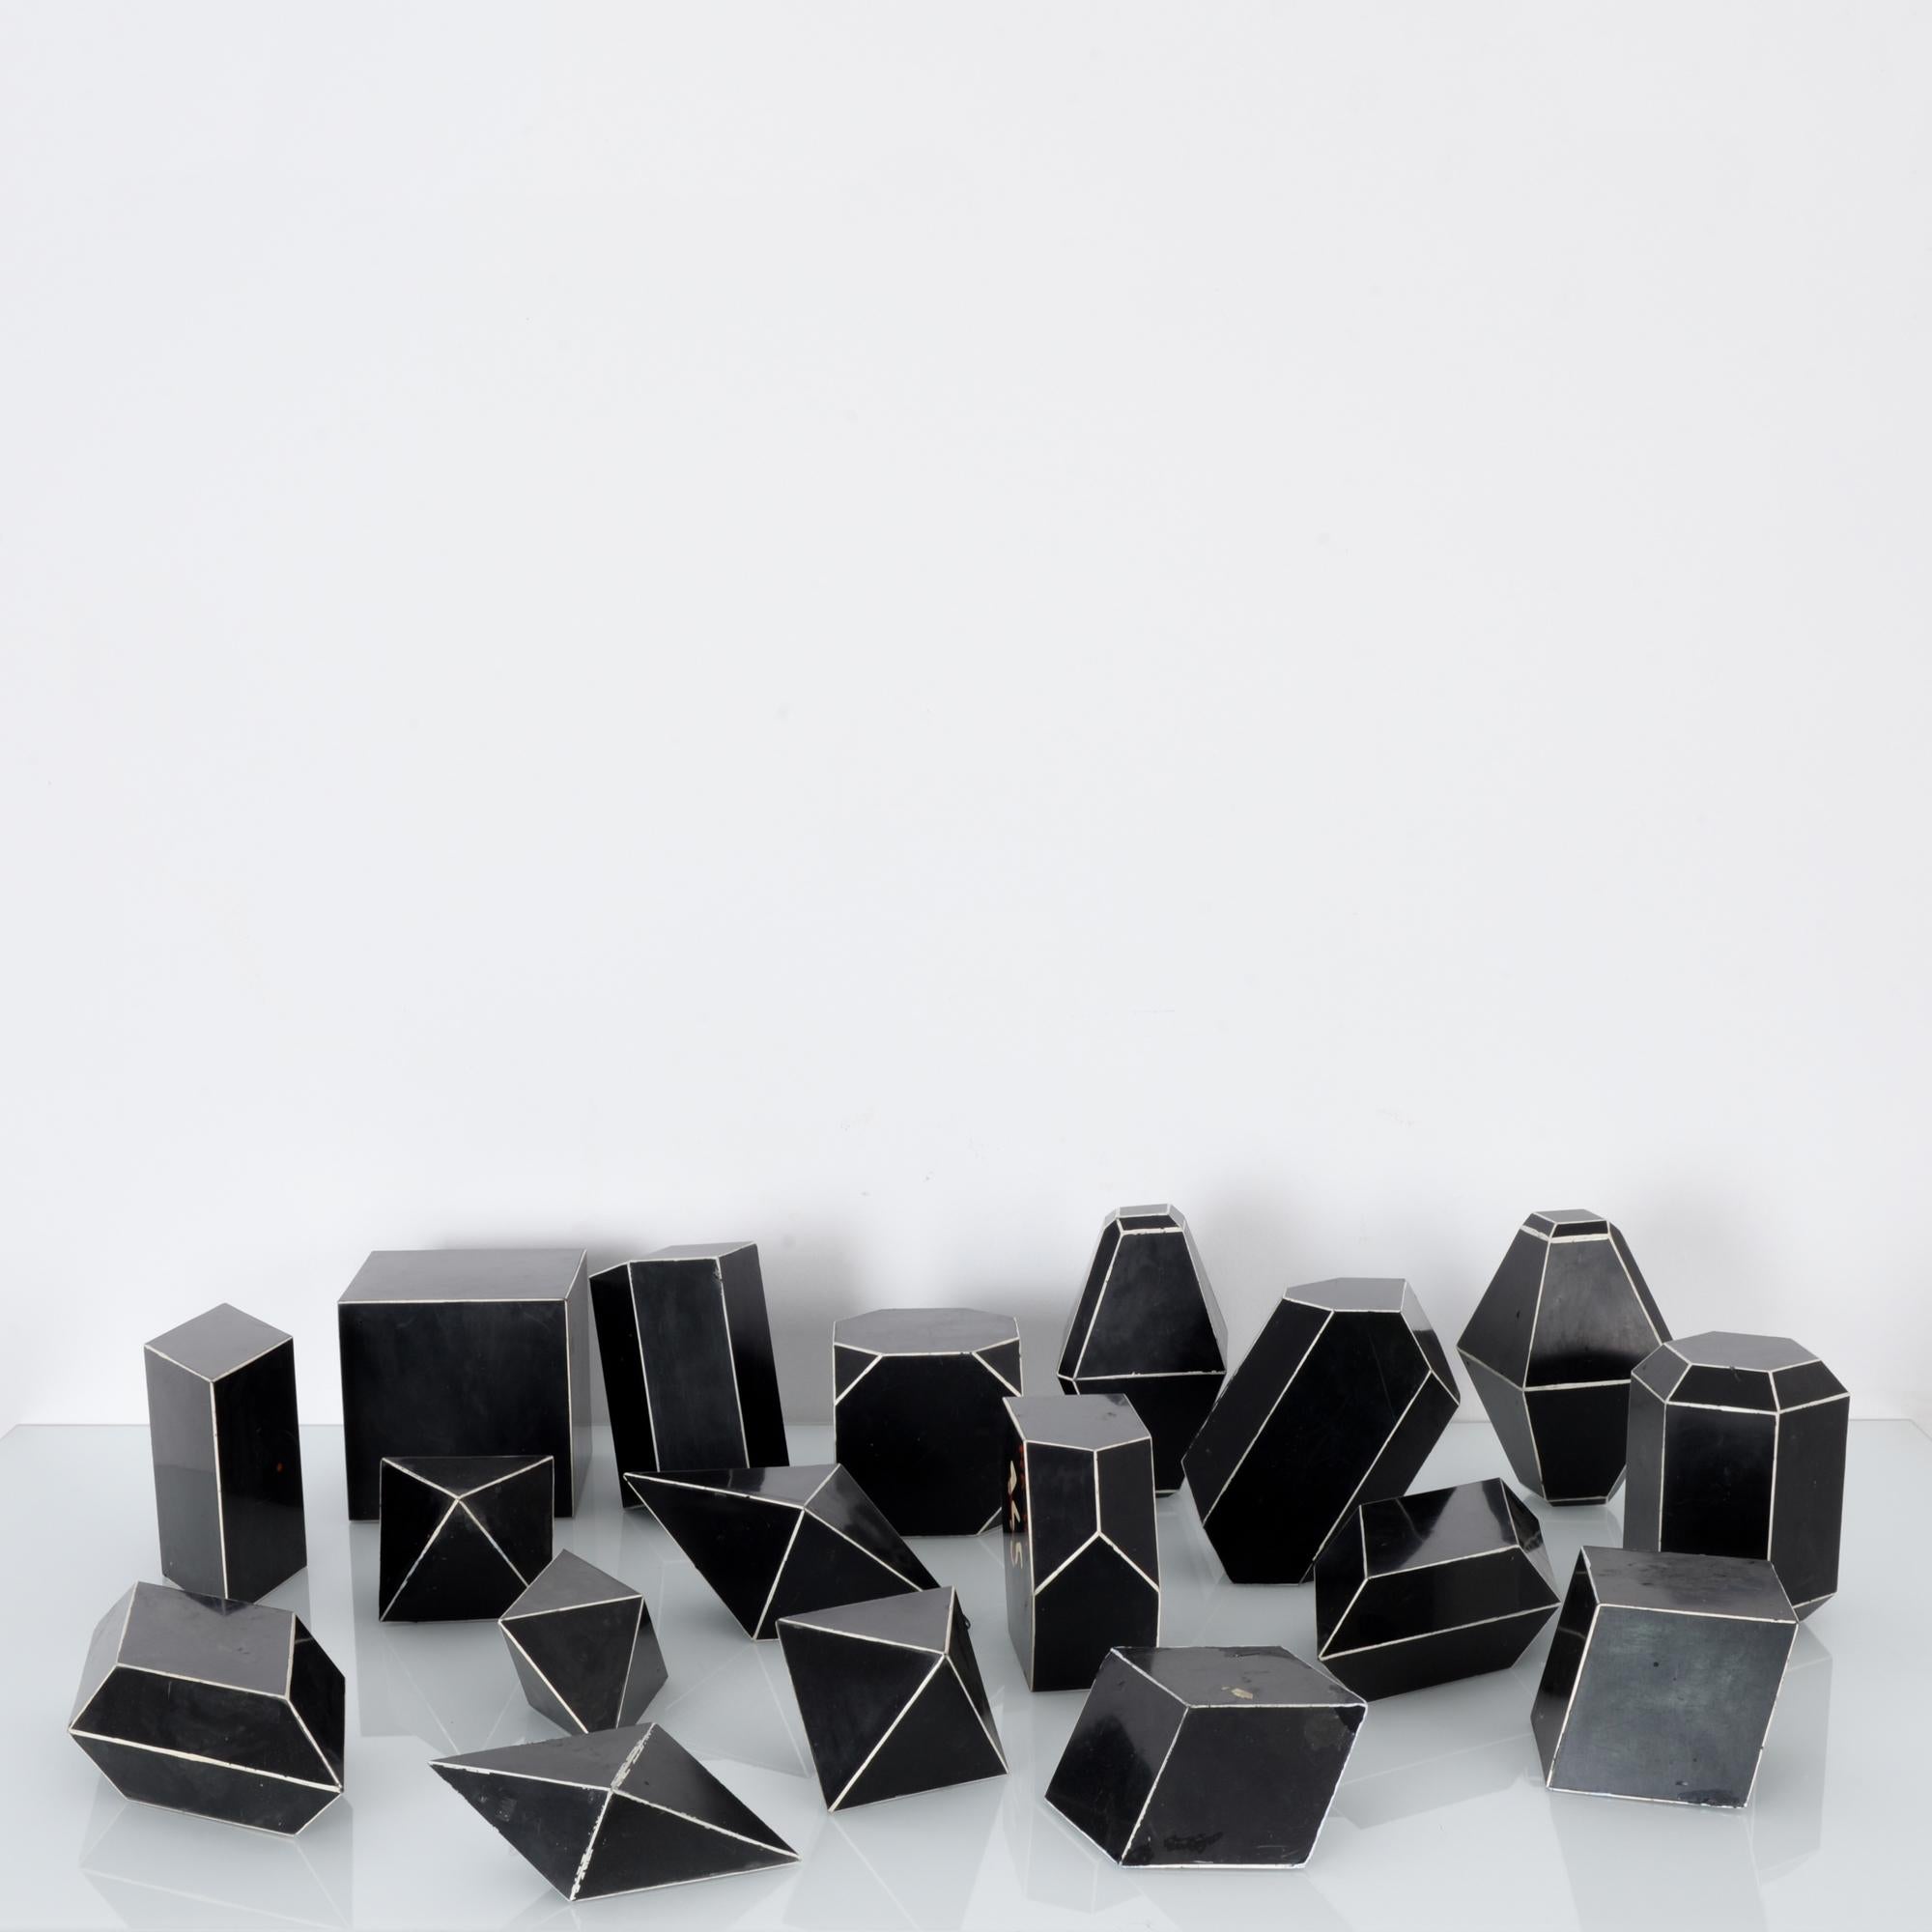 Crystal models from Czechia, circa 1930, made from Bakelite, an early synthetic plastic. Originally used in science classrooms, each depicts a different crystal structure. The bakelite is a deep black color; the edges of the shapes are delineated